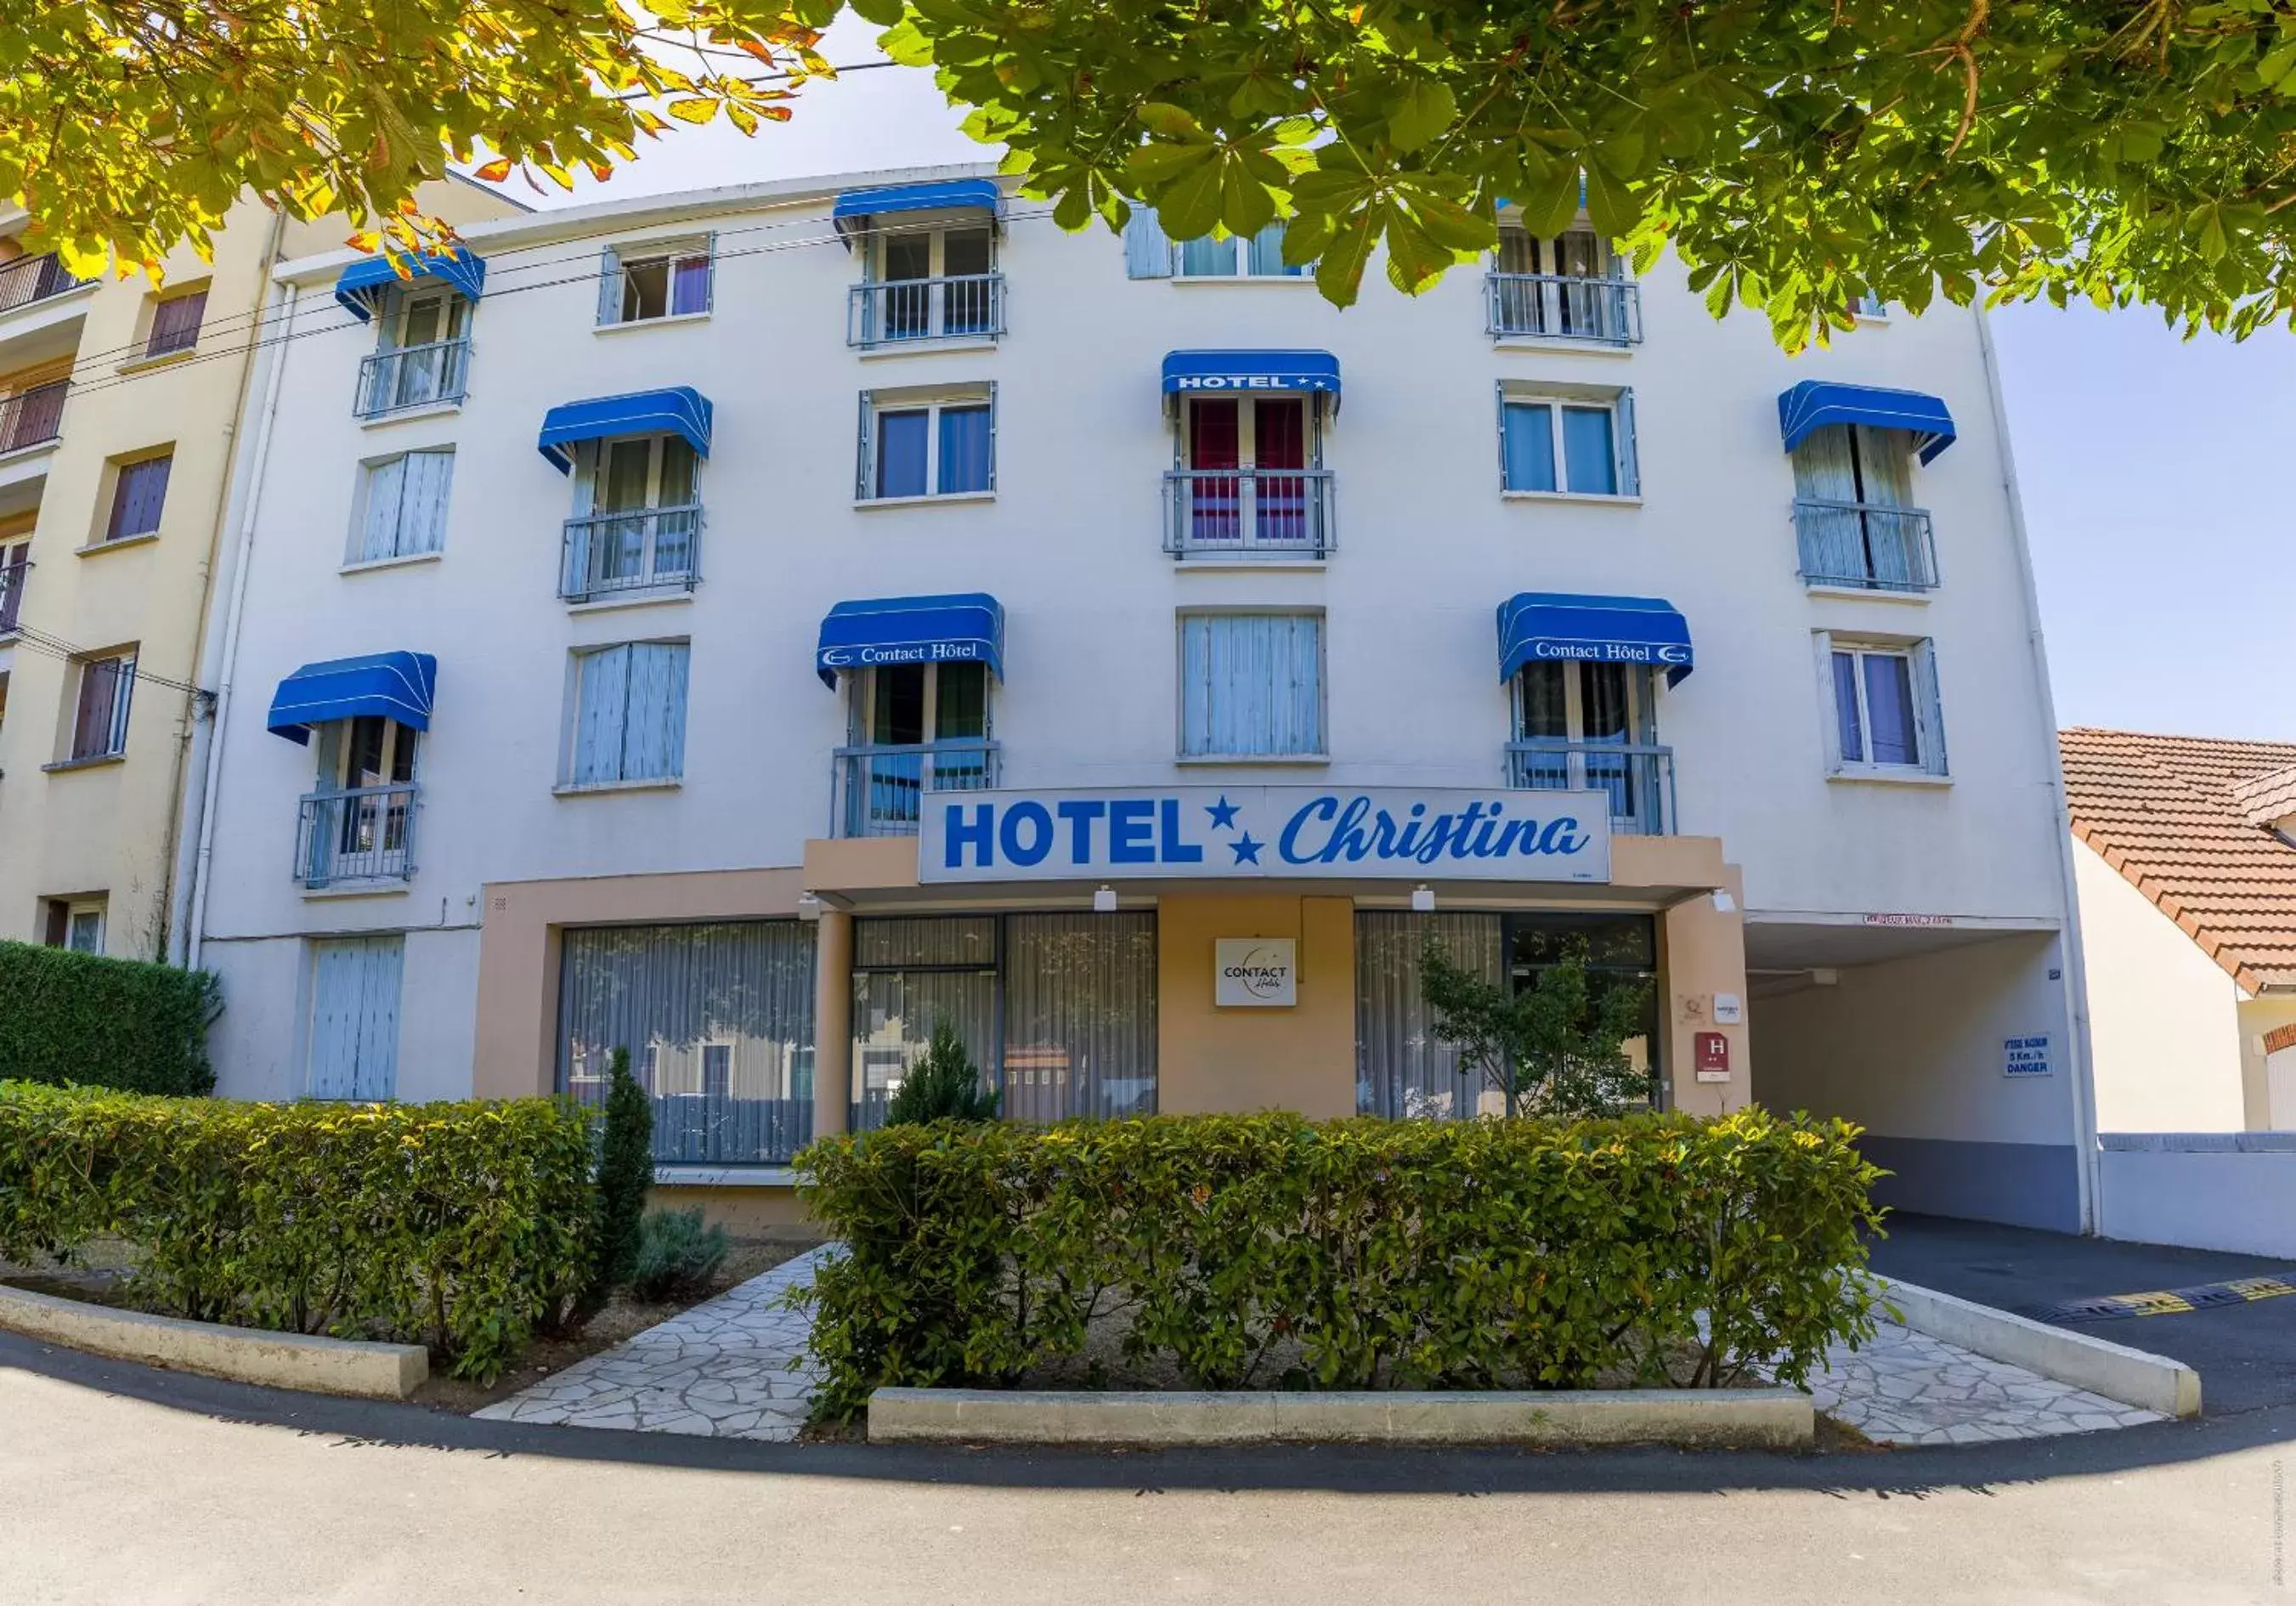 Property building in Hotel Christina - Contact Hotel